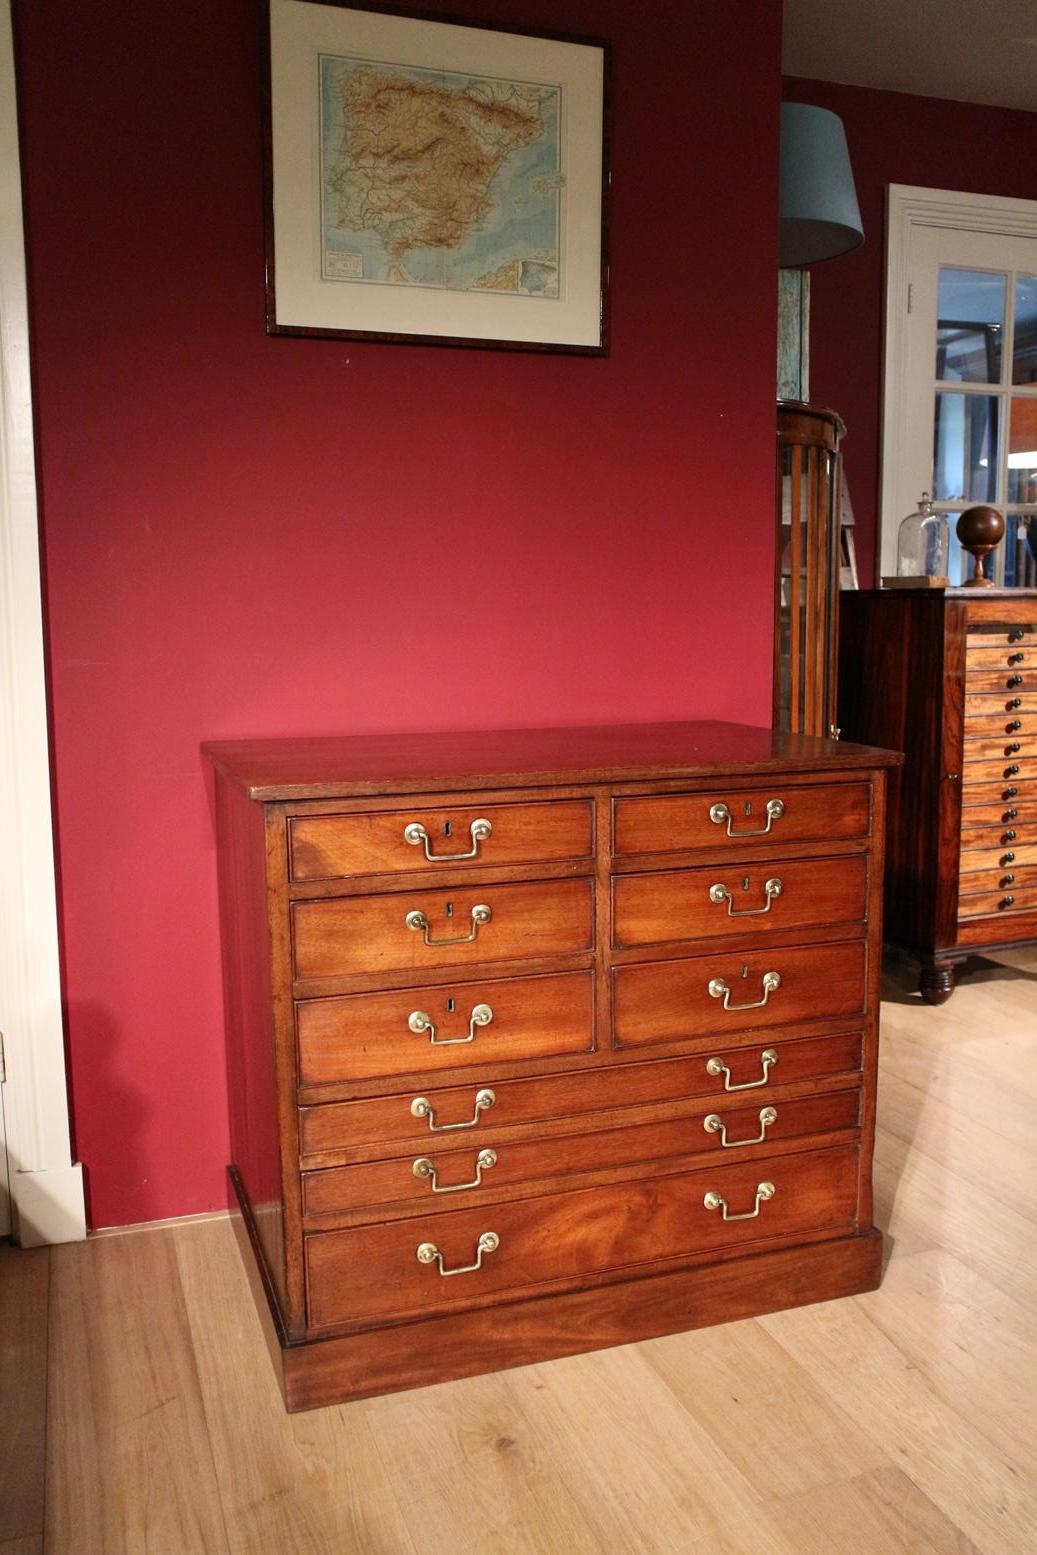 Antique mahogany chest of drawers with interesting drawer configuration. Beautiful aged patina. Special chest of drawers.

Origin: England
Period: Approx. 1830
Size: 90cm x 56cm x H.80cm.